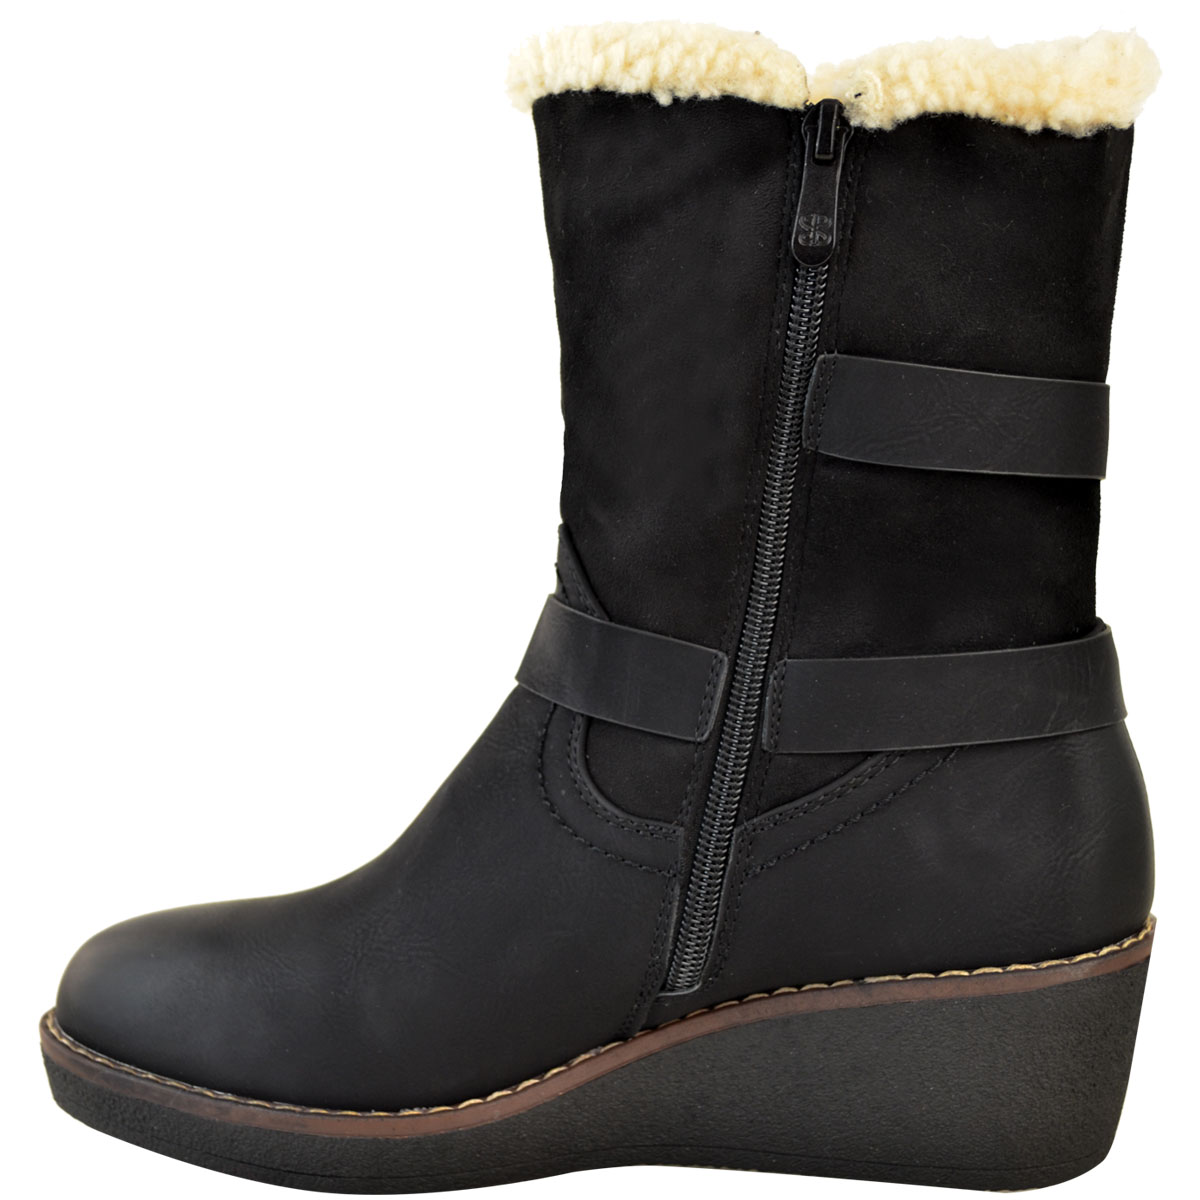 Womens lined winter boots